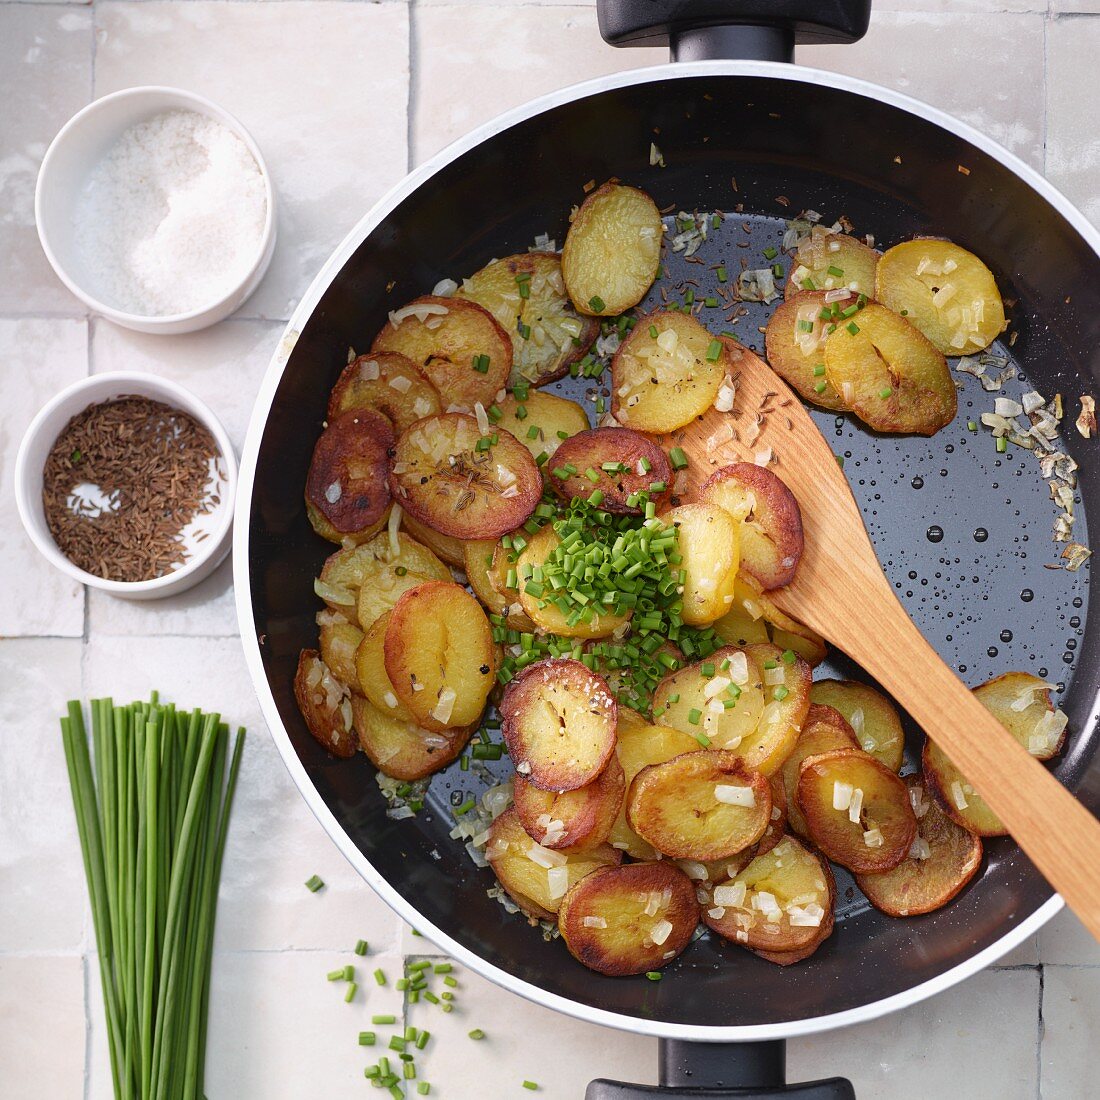 Fried potatoes with caraway and chives